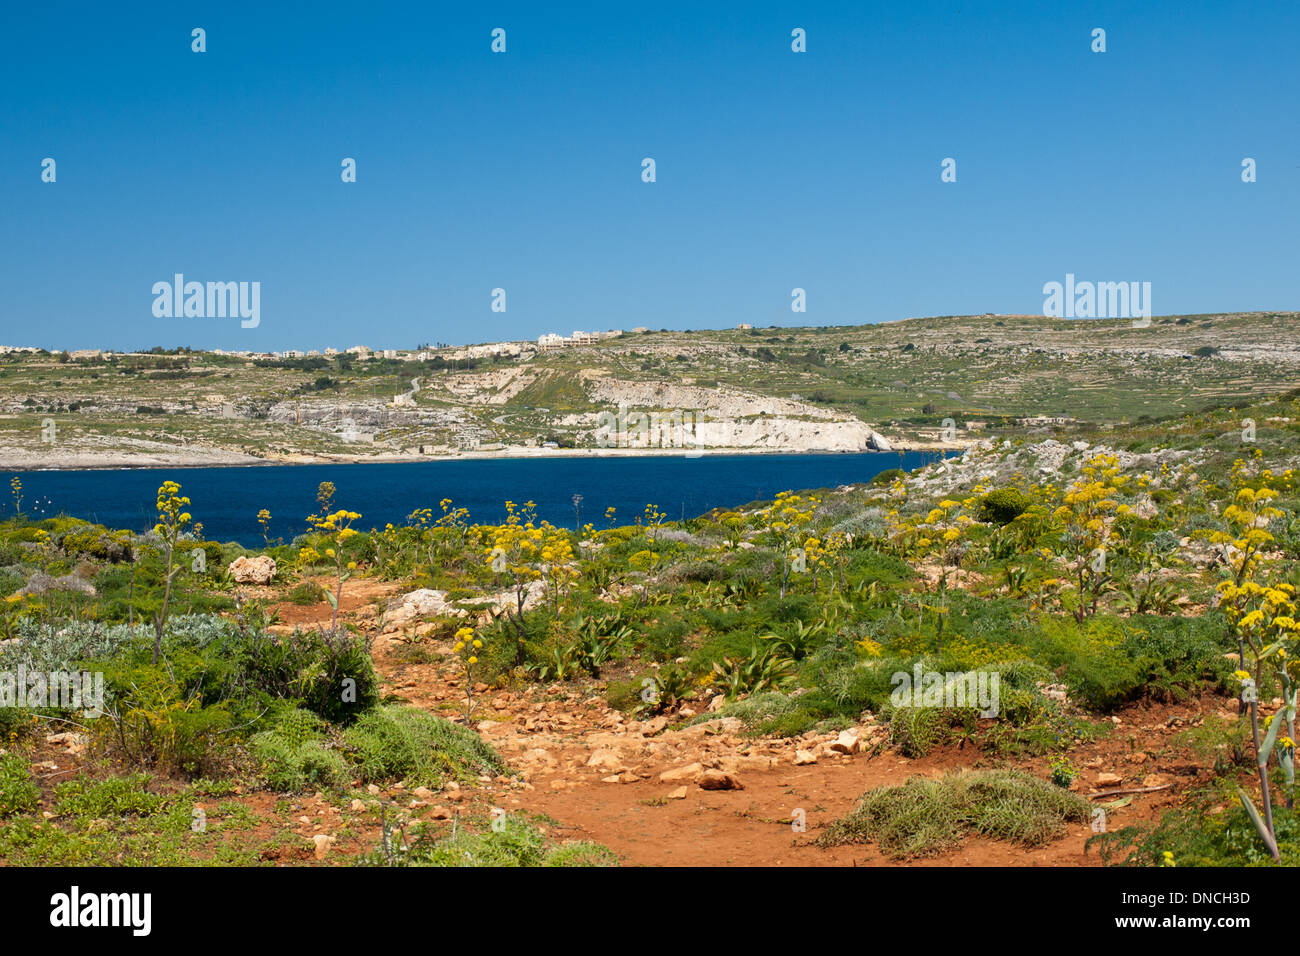 A view of the vegetation and shrubland on the island of Comino, Malta.  The island of Gozo is in the distance. Stock Photo